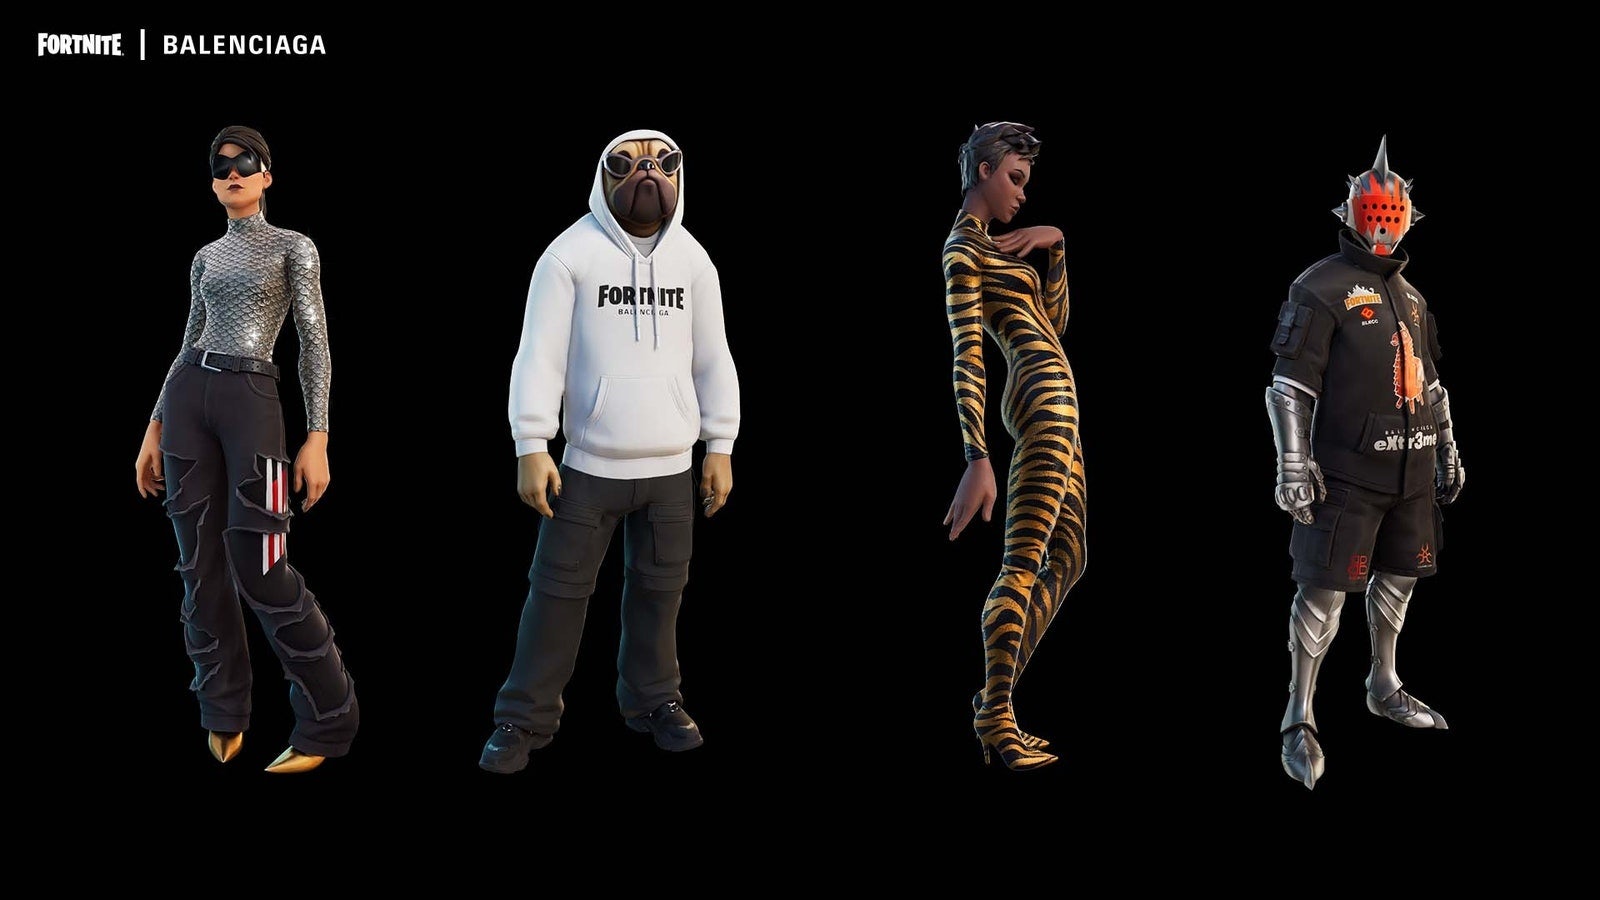 Balenciaga brought high fashion to Fortnite in 2021, but Fortnite is still yet to catch up with rival Roblox. Photo: Fortnite